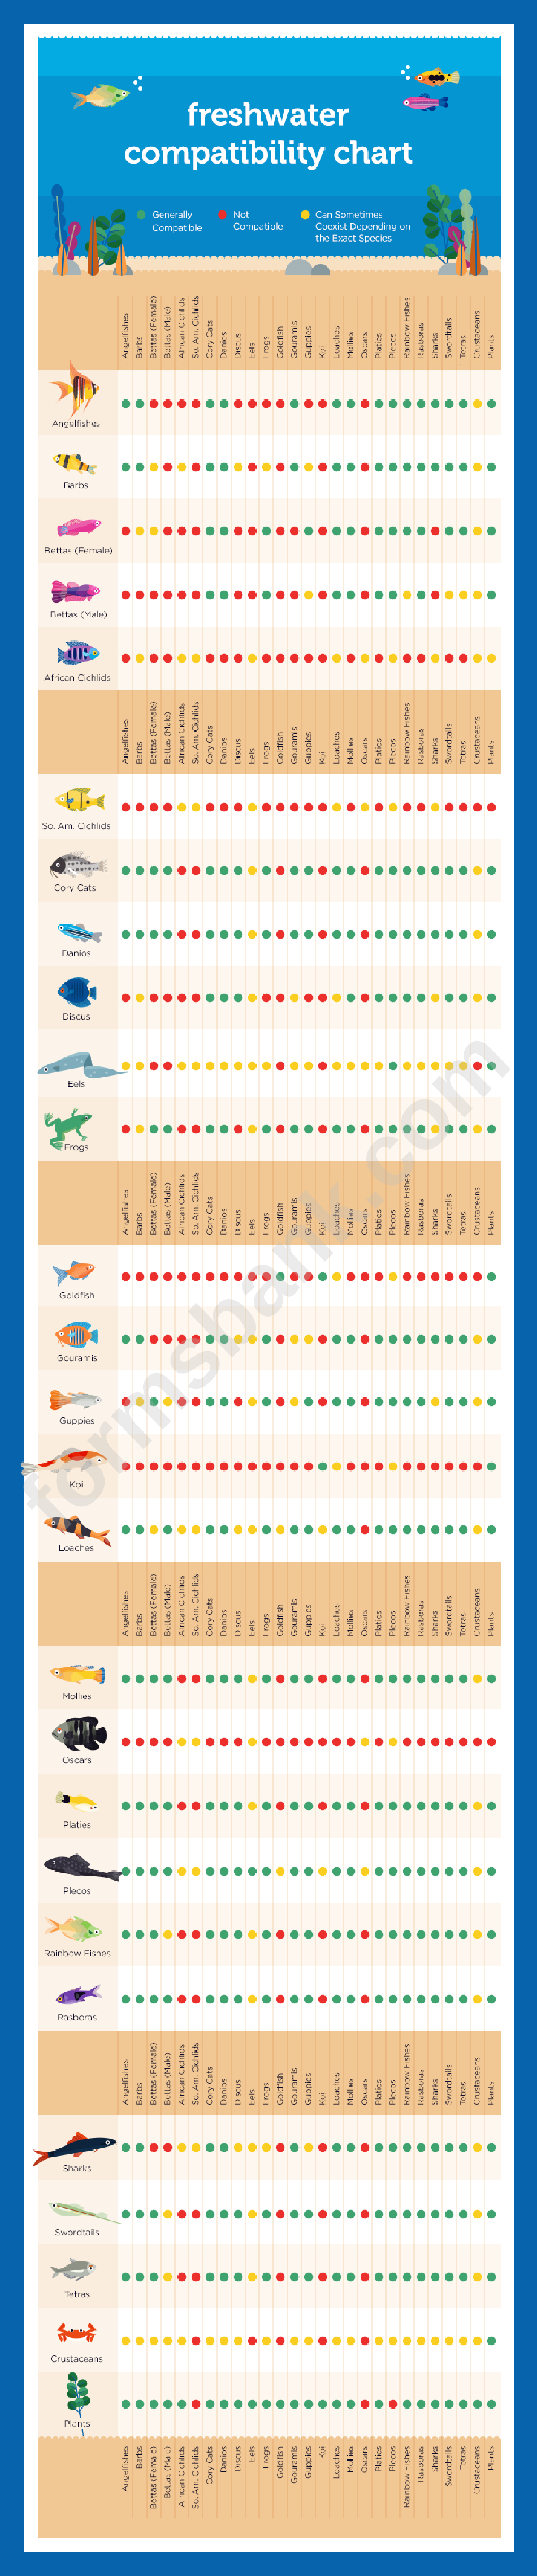 Freshwater Compatibility Chart